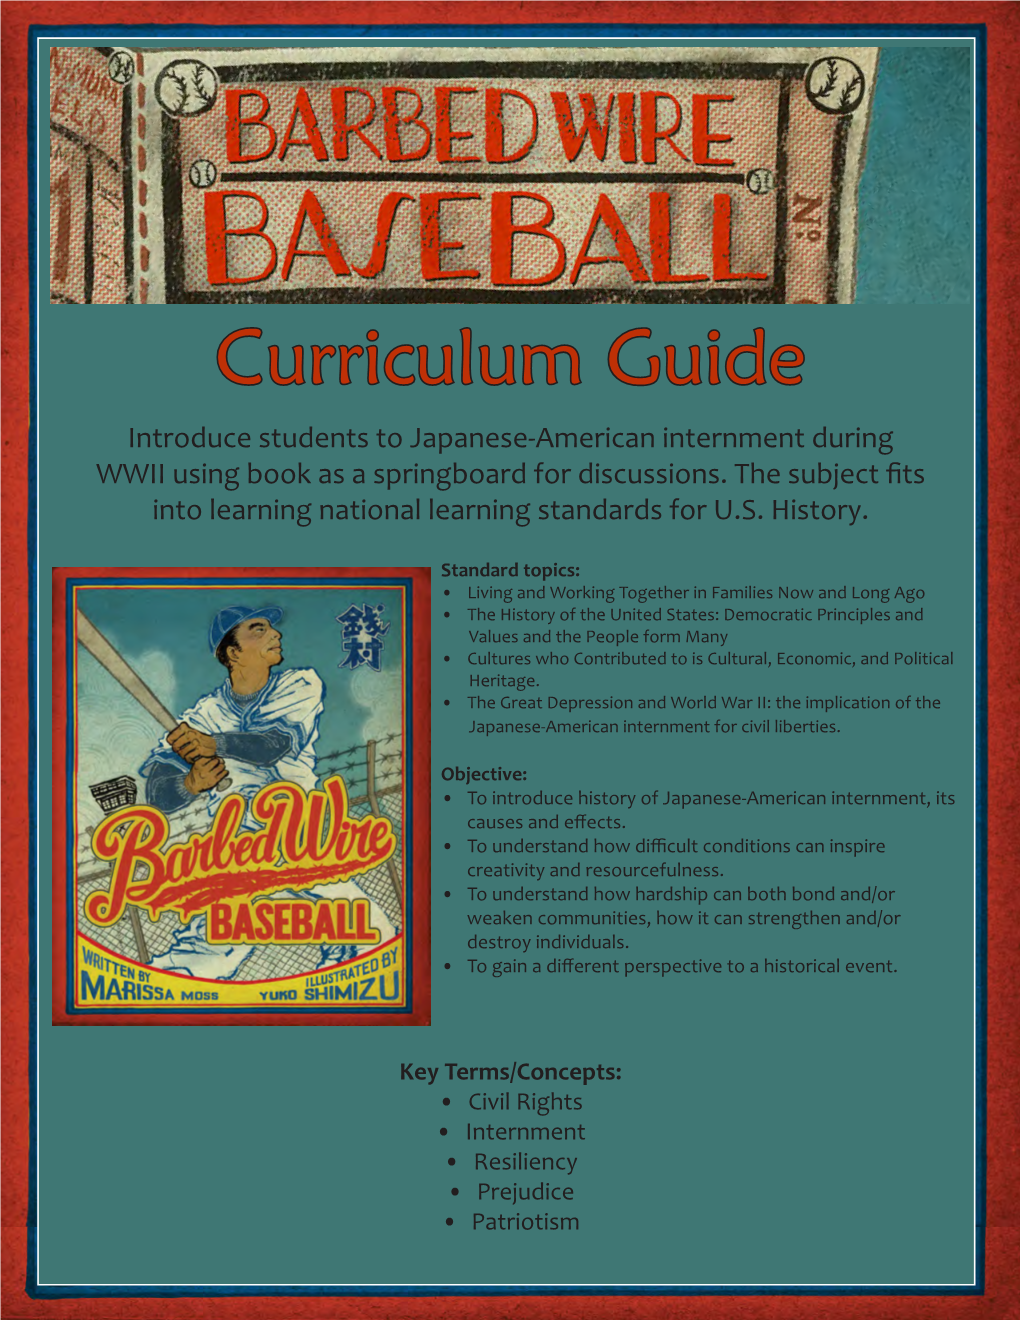 Barbed Wire Baseball to Students and Start a Discussion on the Following Topics: 1